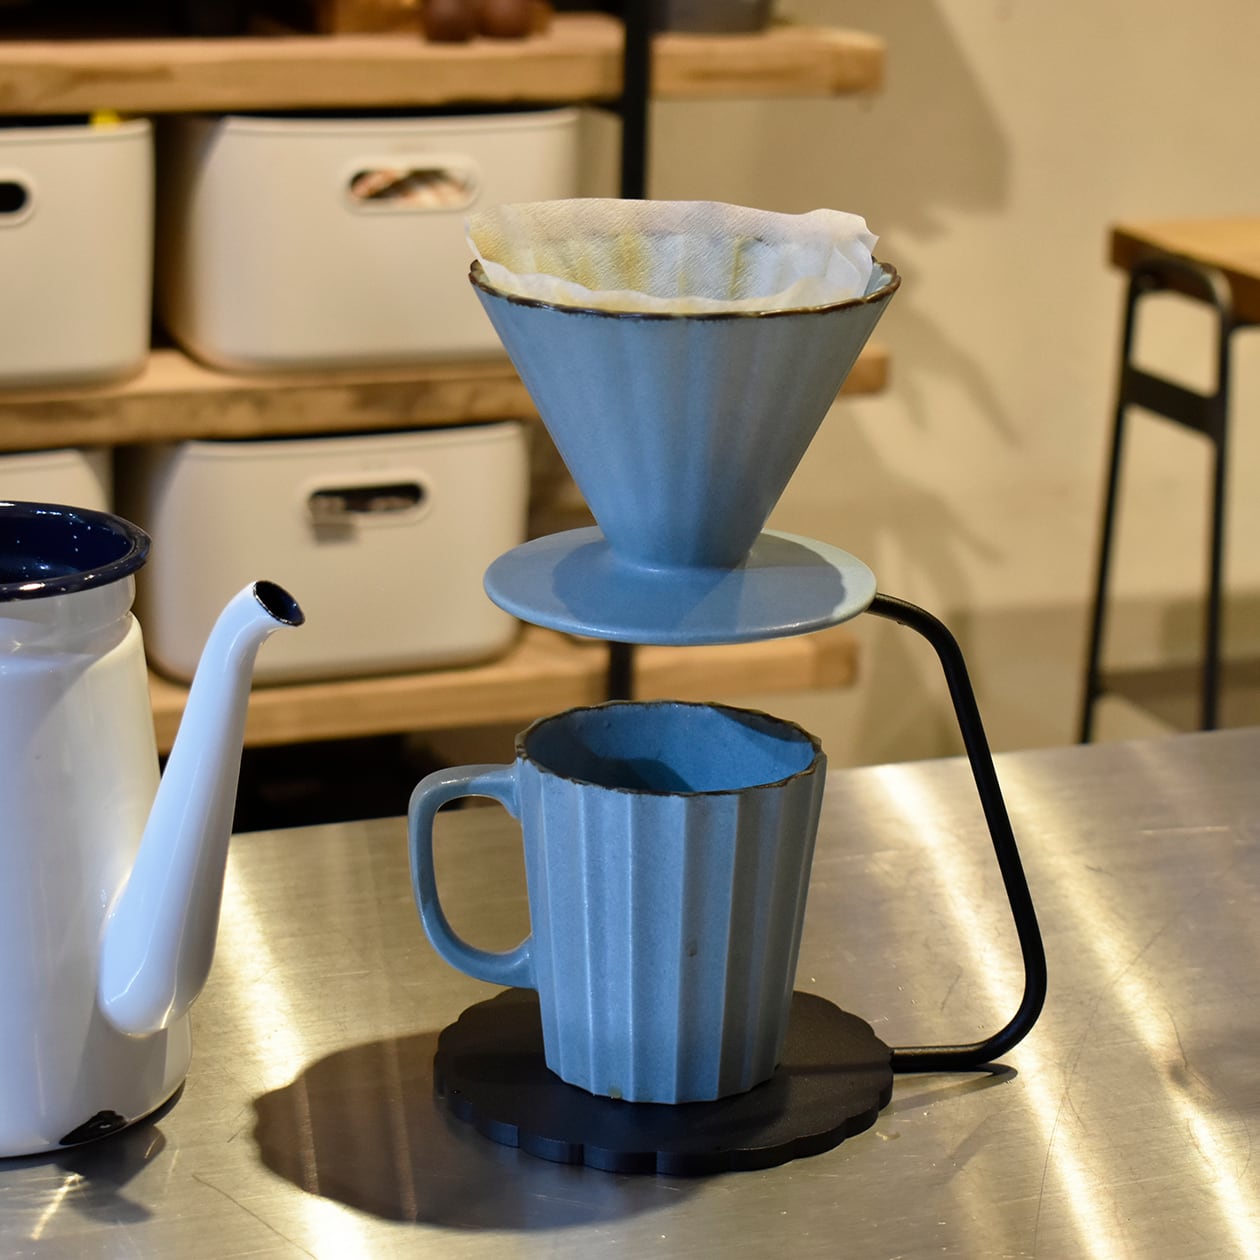 Pour Over Coffee Set Ceramic Coffee Filter 02 Bracket Ceramics Filters  Dripper Stand Percolator Shop Cup Share Pot その他キッチン、日用品、文具